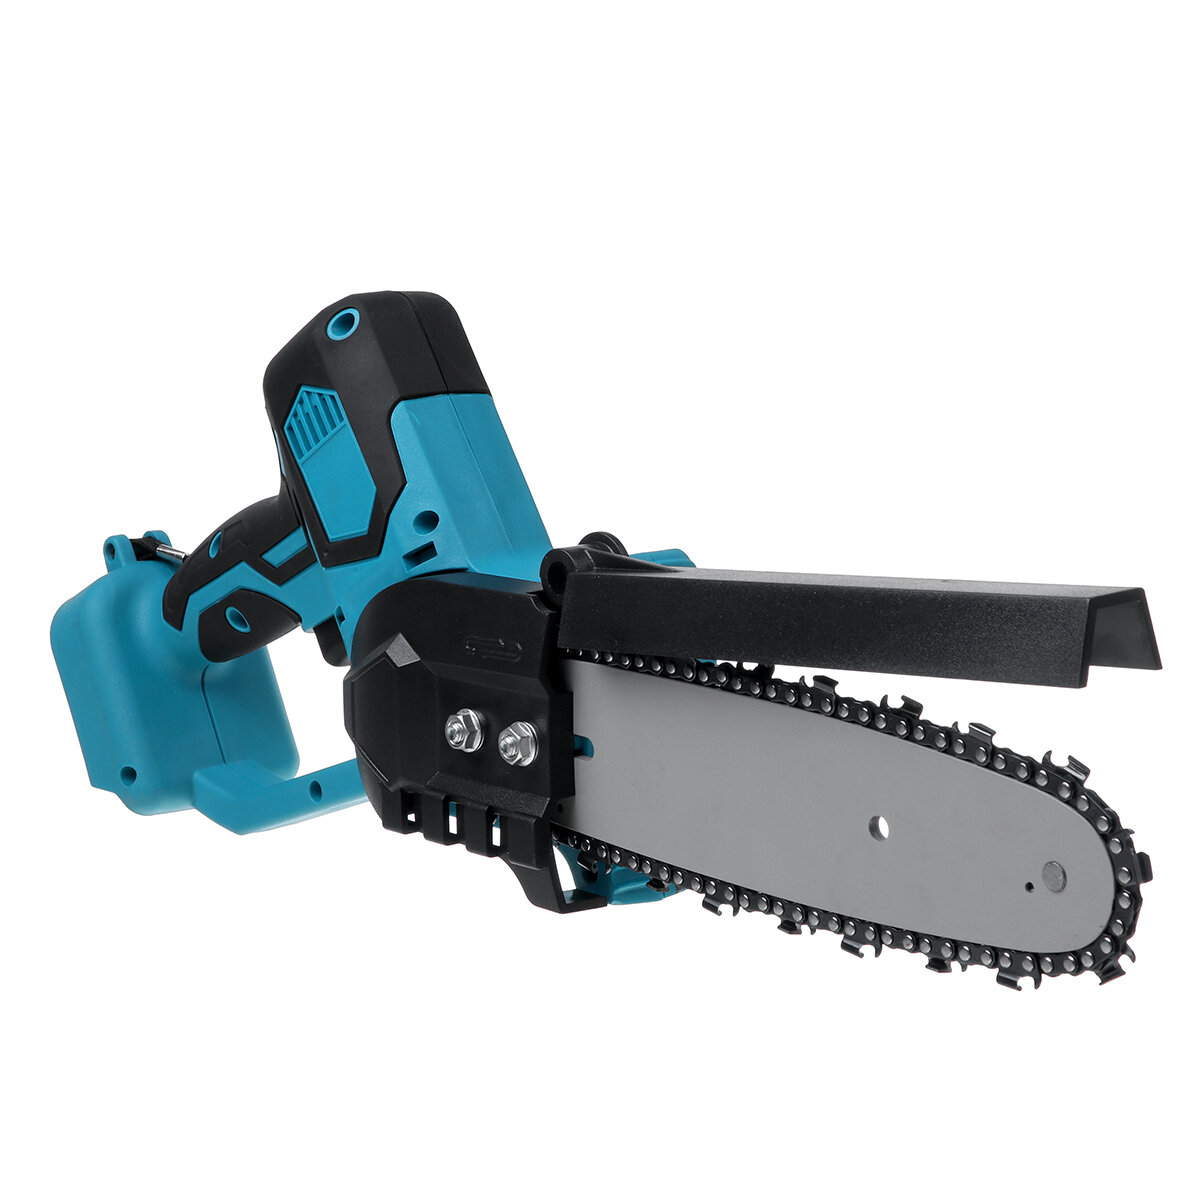 8 inch chainsaw portable cordless electric chain saws woodworking power tool for makita 18v battery